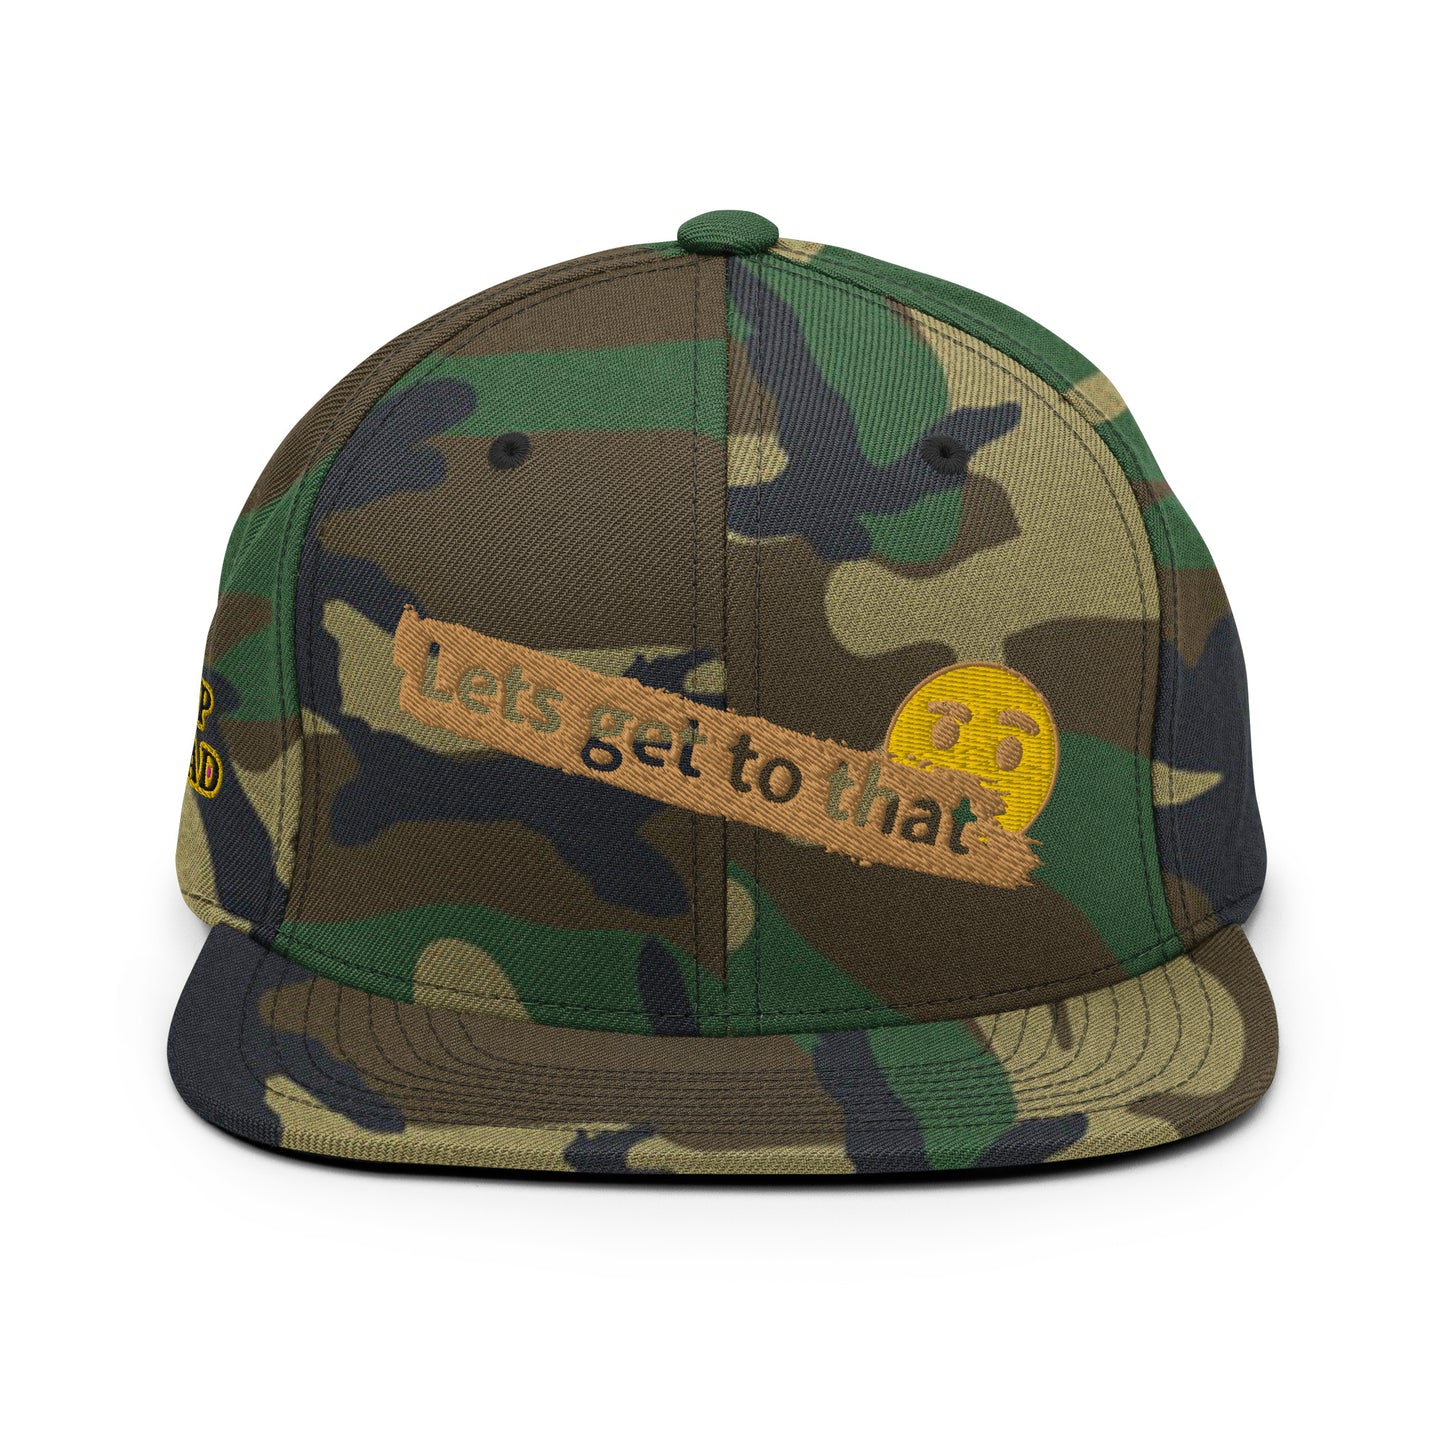 “Lets Get To That” Camo/Green